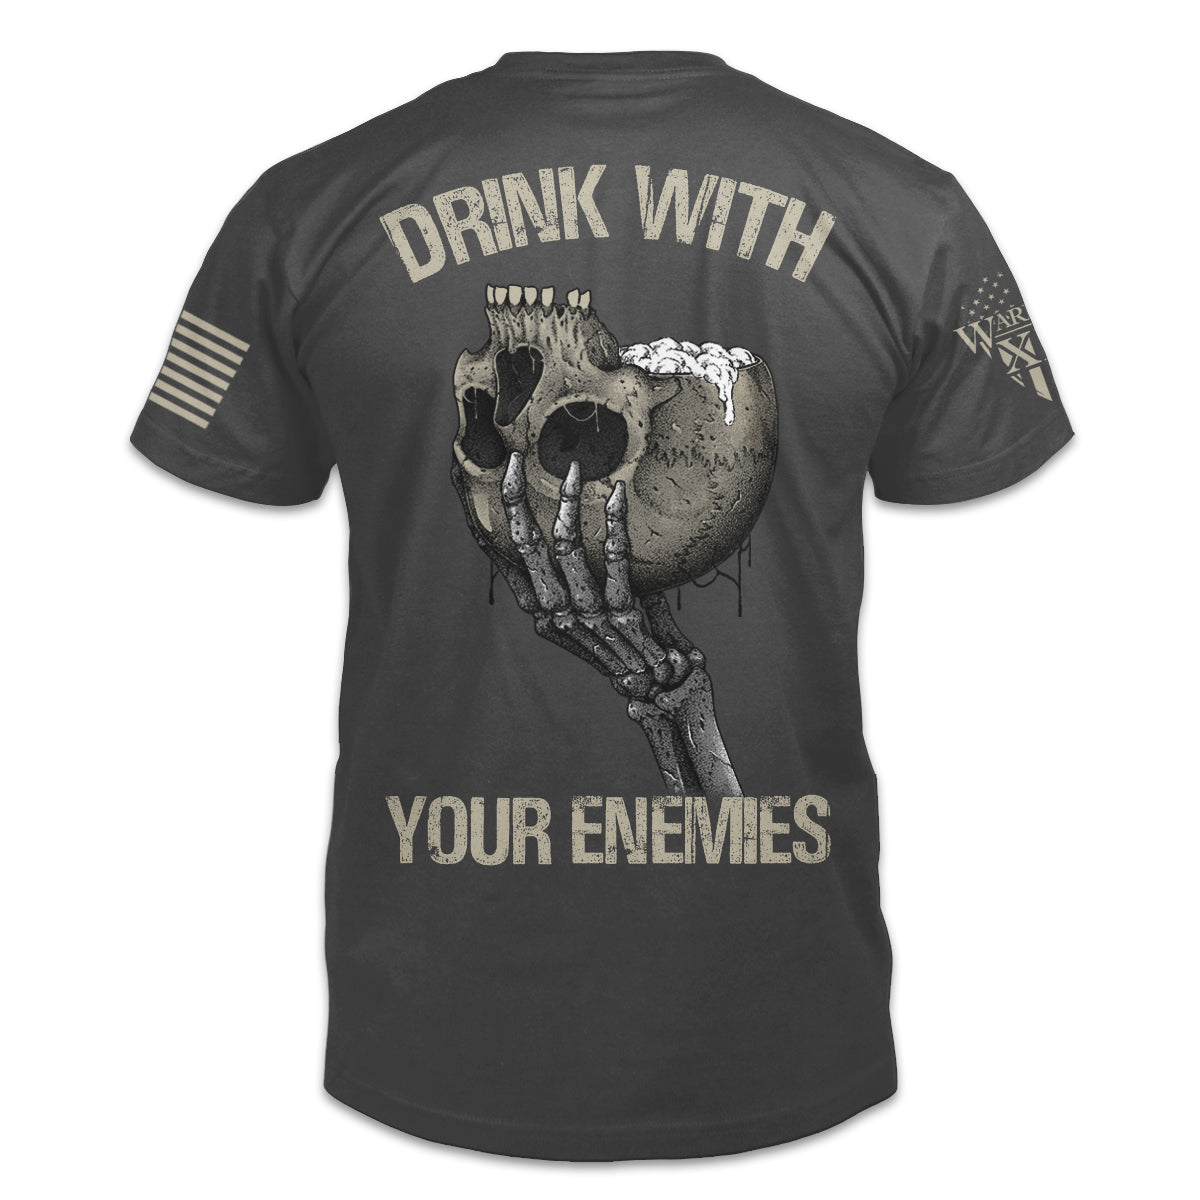 An asphalt grey t-shirt featuring a graphic on the back with upside-down skull with a foamy beverage coming out of the skull, being held by a skeletal hand and the words "Drink with your enemies."